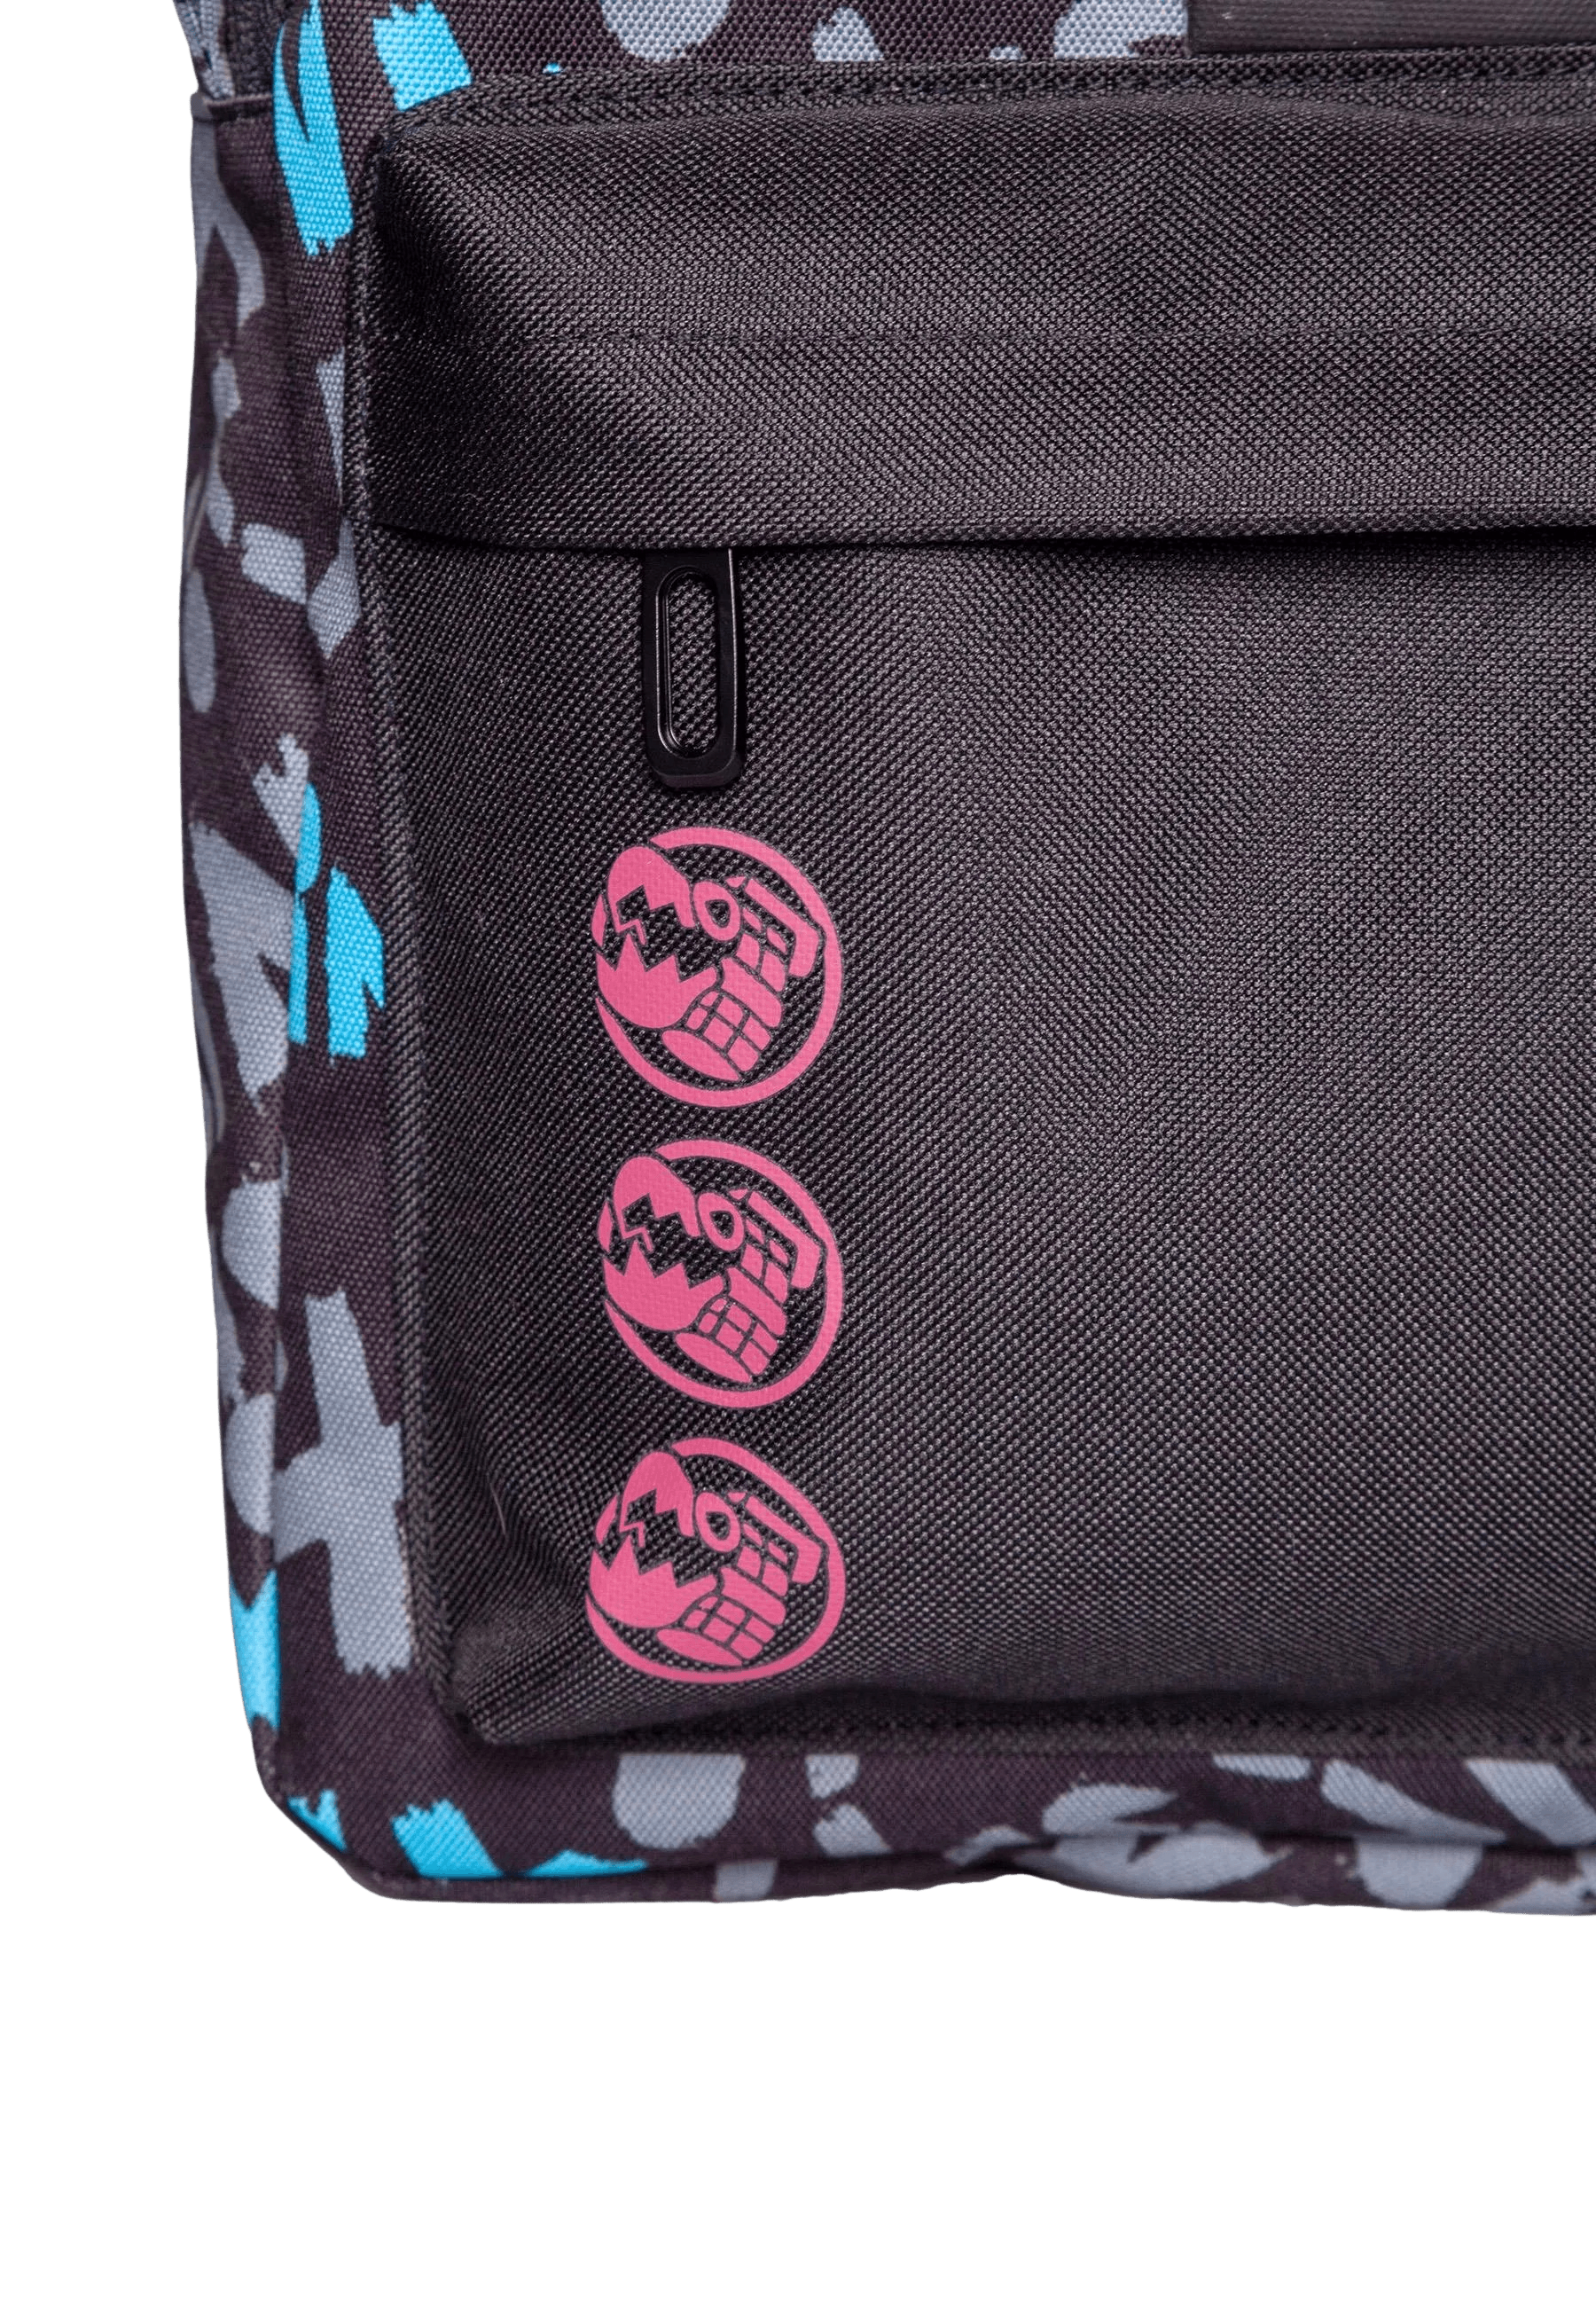 Difuzed - League of Legends - Jinx Basic Backpack - The Card Vault